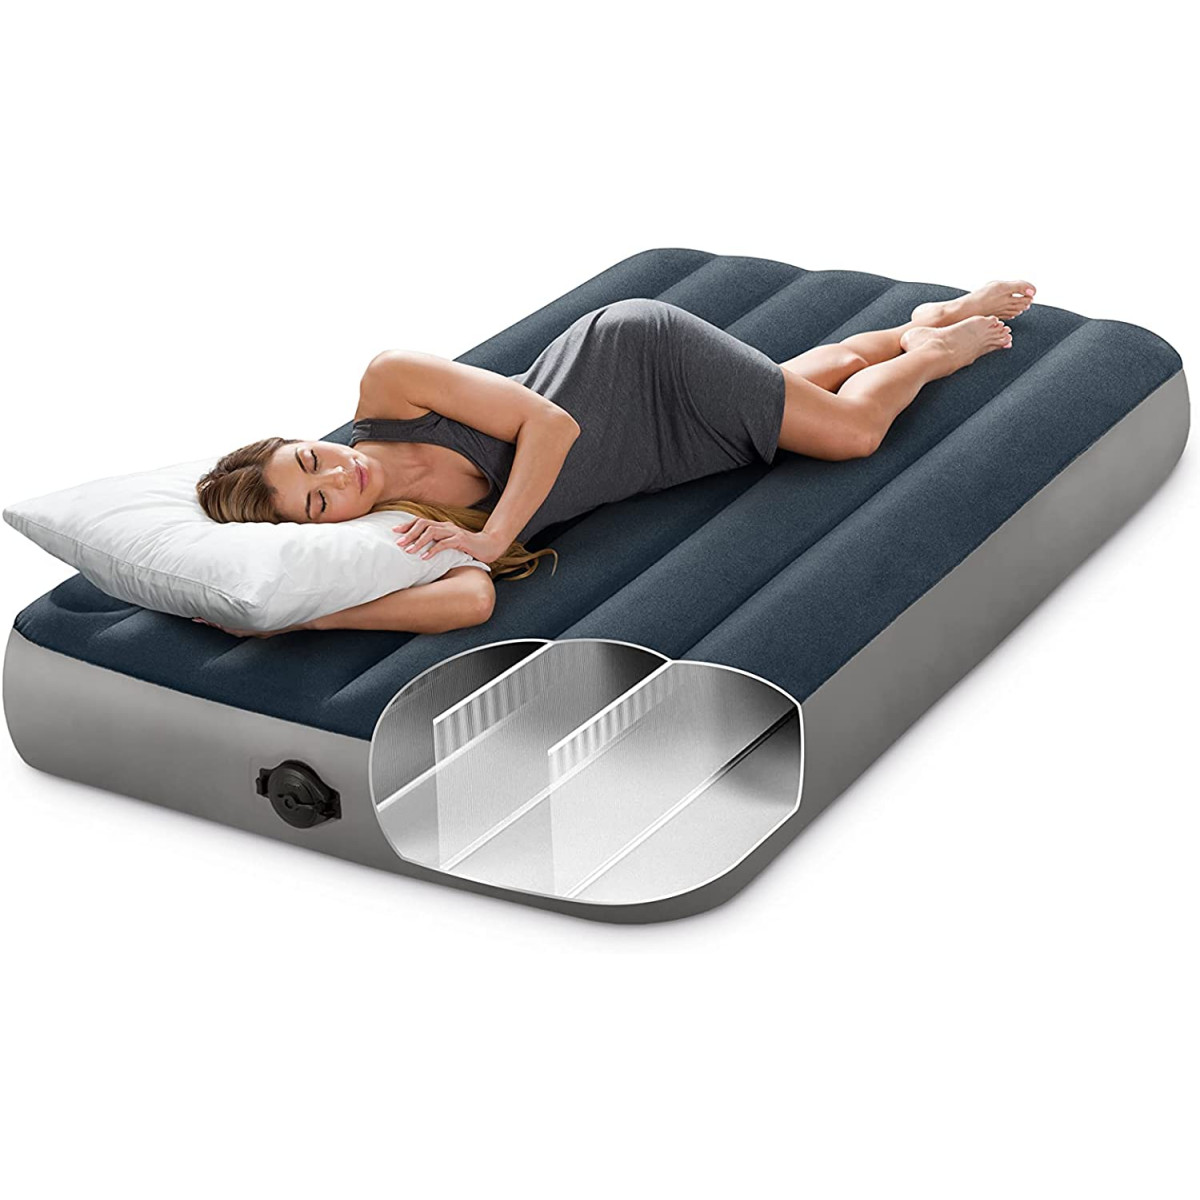 Matelas gonflable Single High 1 personne INTEX